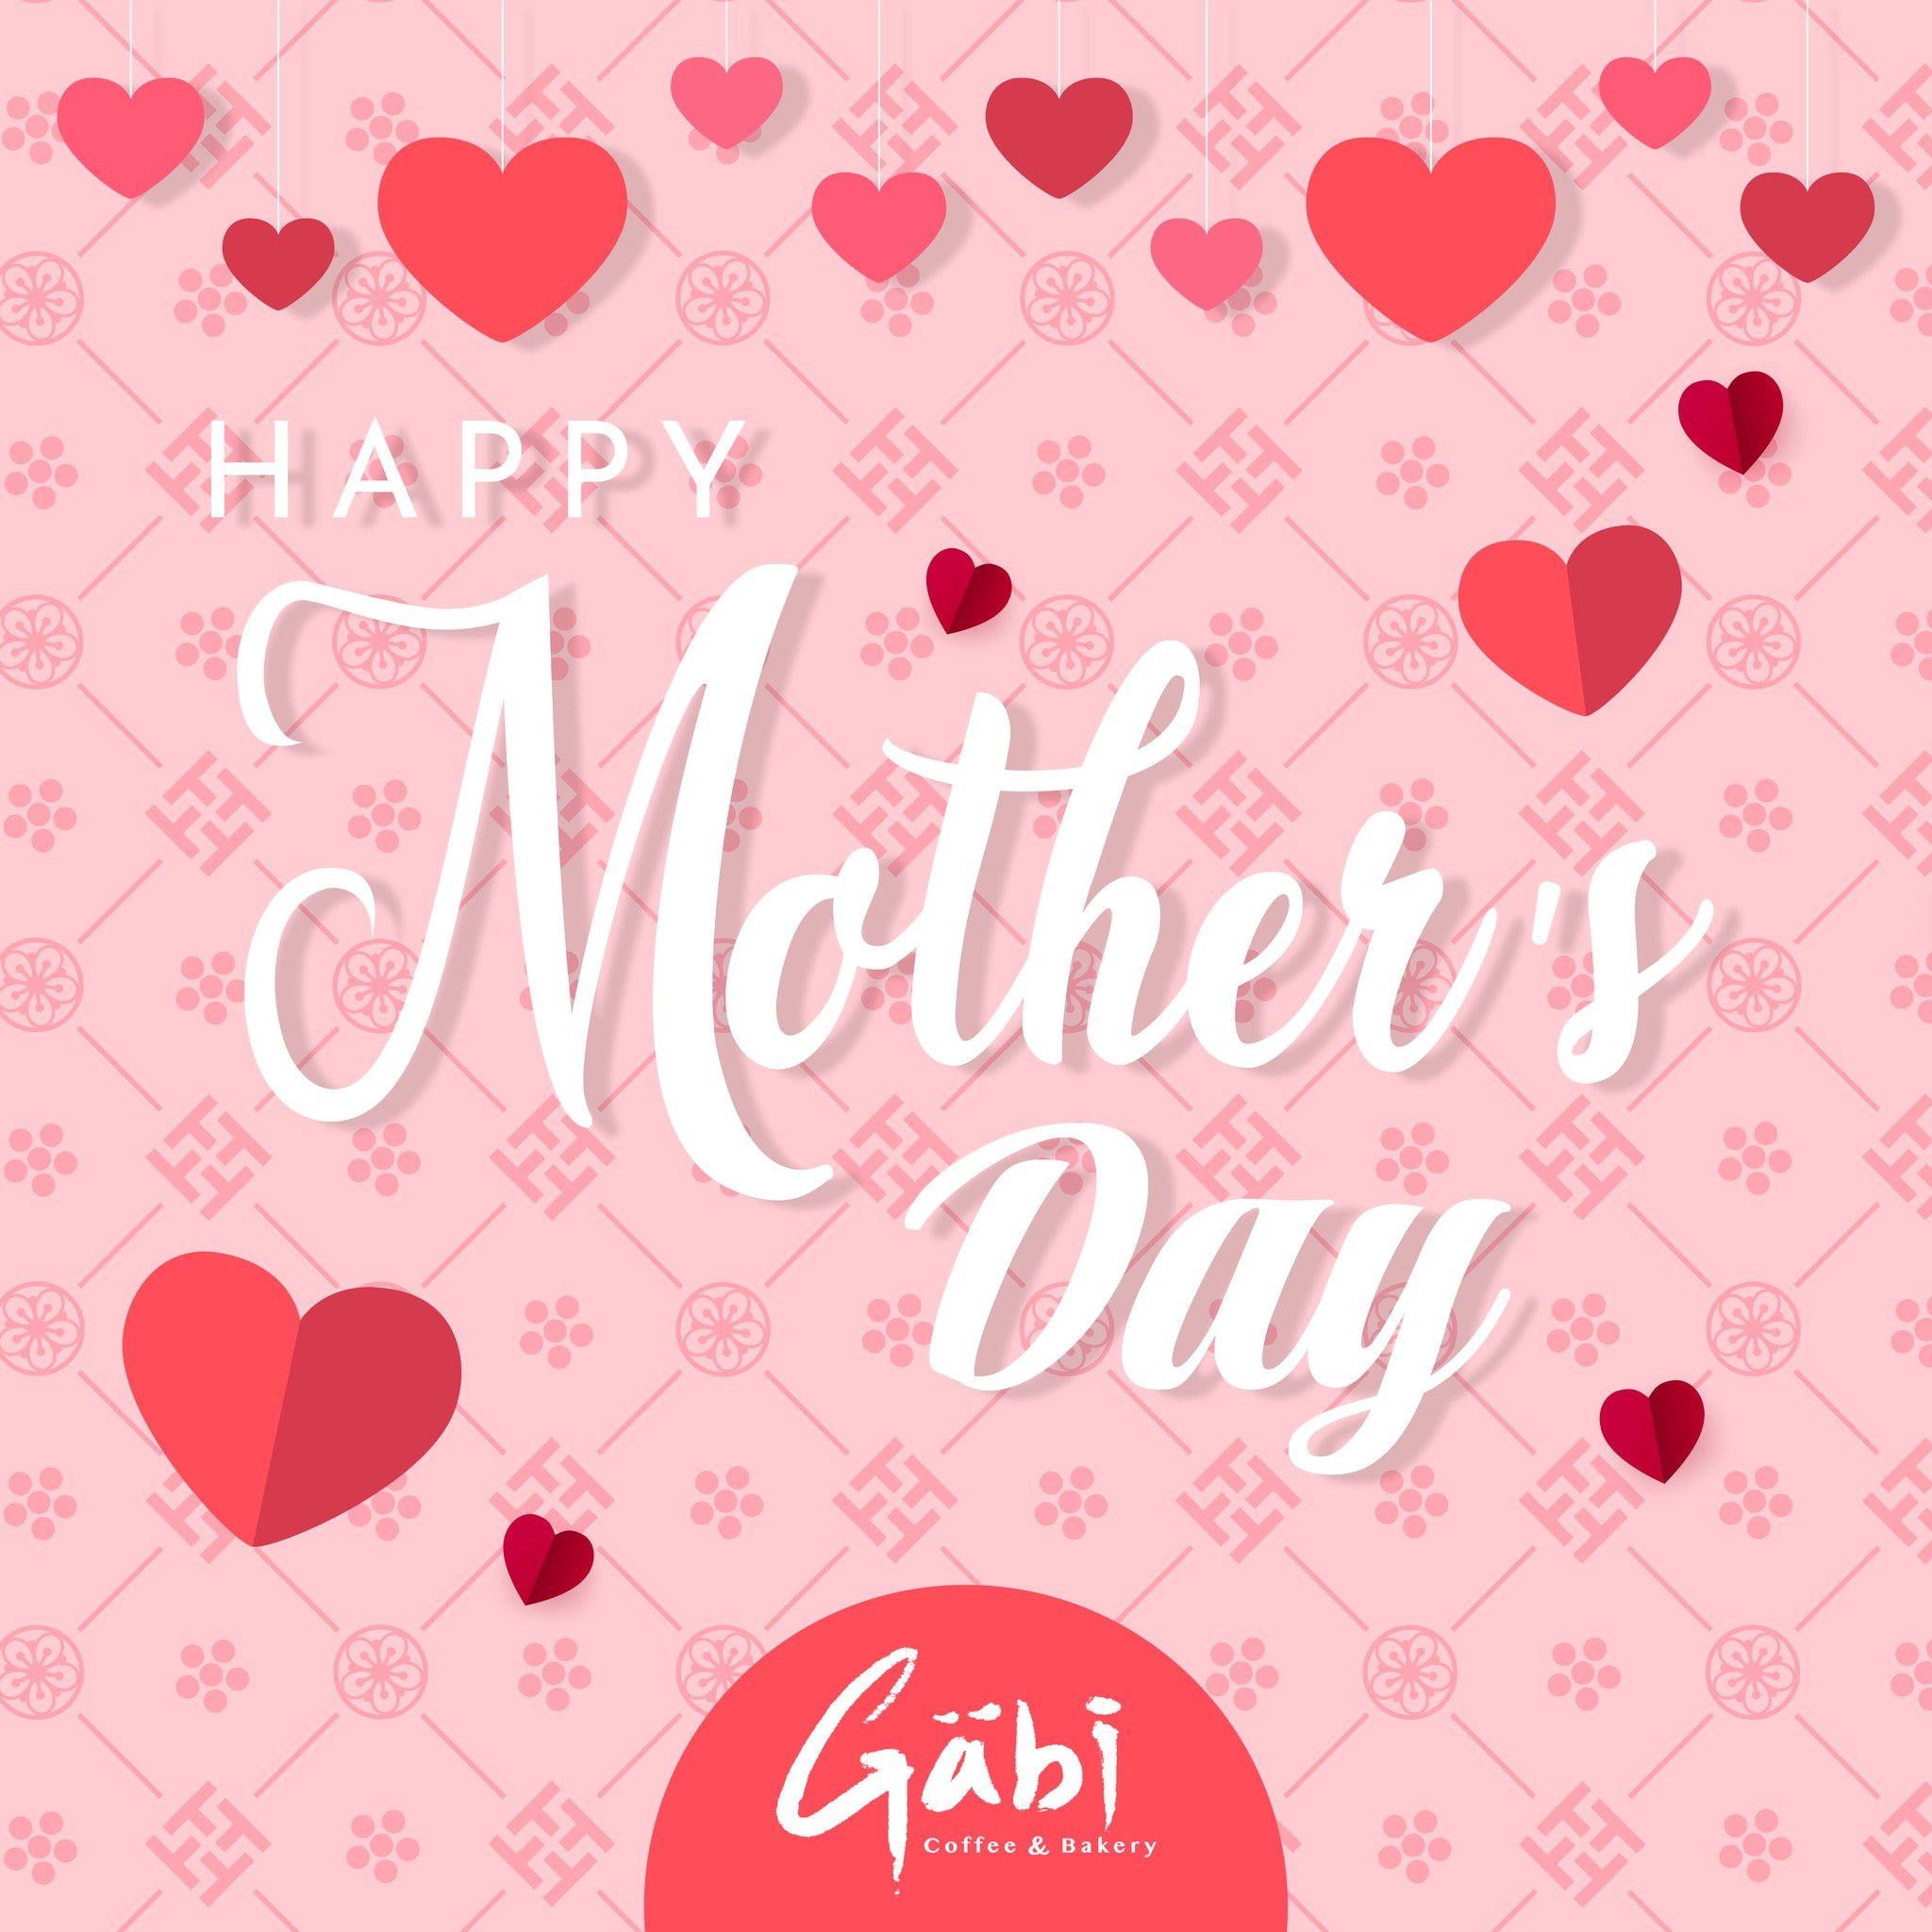 ☕👩💕 From G&auml;bi to all our amazing Mothers, Happy Mother's Day!! 💞 For today only, we will be having a Mother's Day Only Financier Gift Set! 🌹 ☕ Enjoy our Flowers For Mom Latte prepared Hot or Iced. 🌹🌹Celebrate Mother's Day in G&auml;bi styl